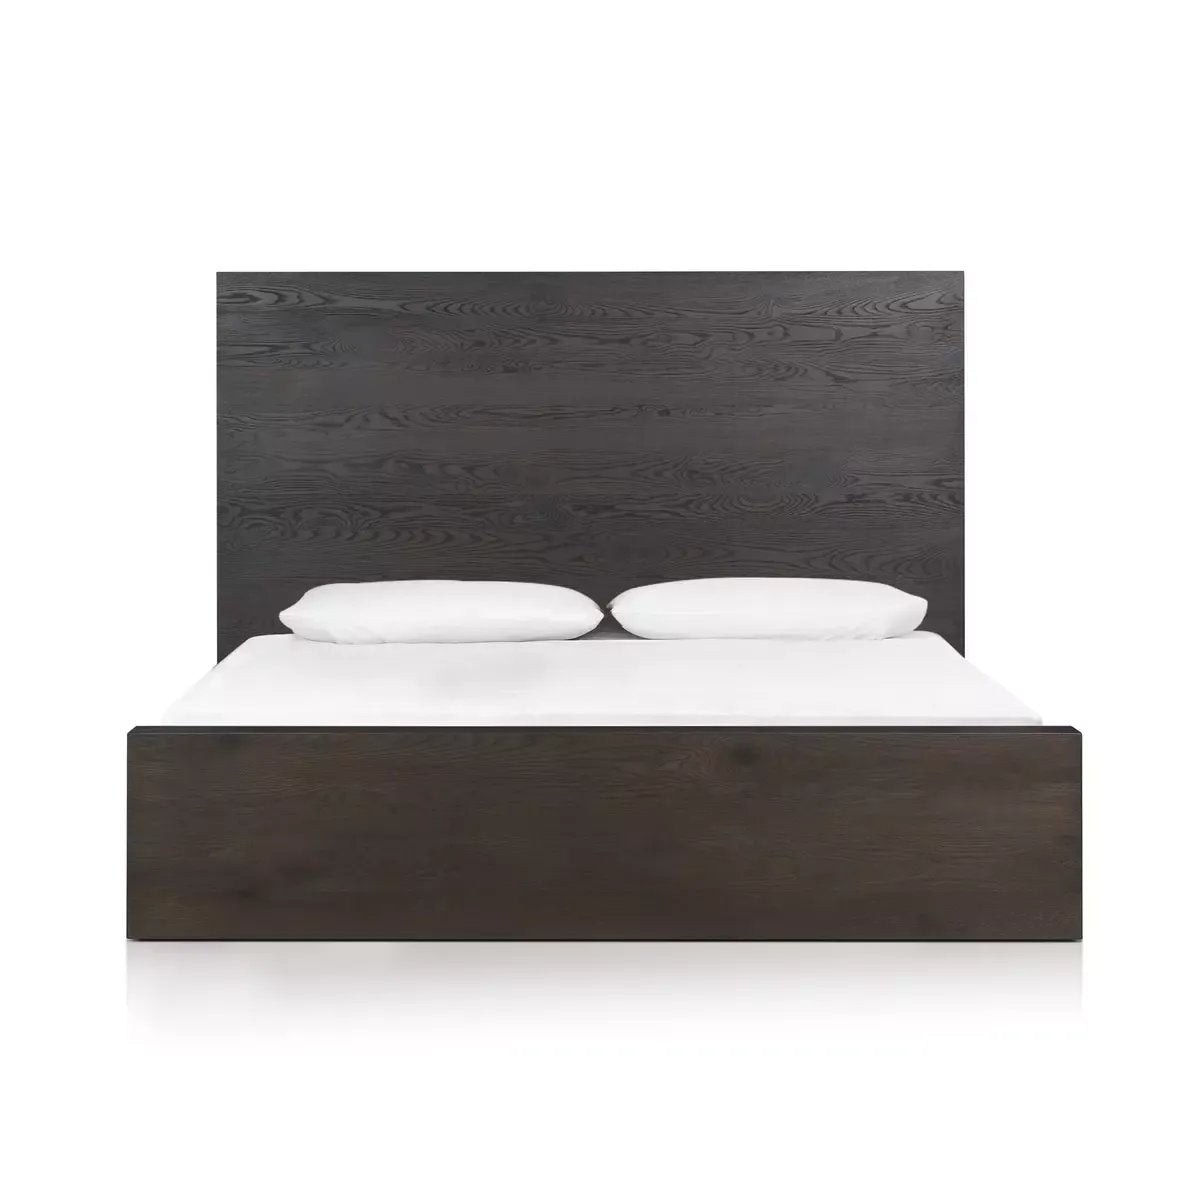 Minimalist and authentically platform, this resawn umber oak bed has a high-rise headboard for an understated modern look. Deep wood grain adds natural character.Collection: Hamilto Amethyst Home provides interior design, new home construction design consulting, vintage area rugs, and lighting in the Winter Garden metro area.